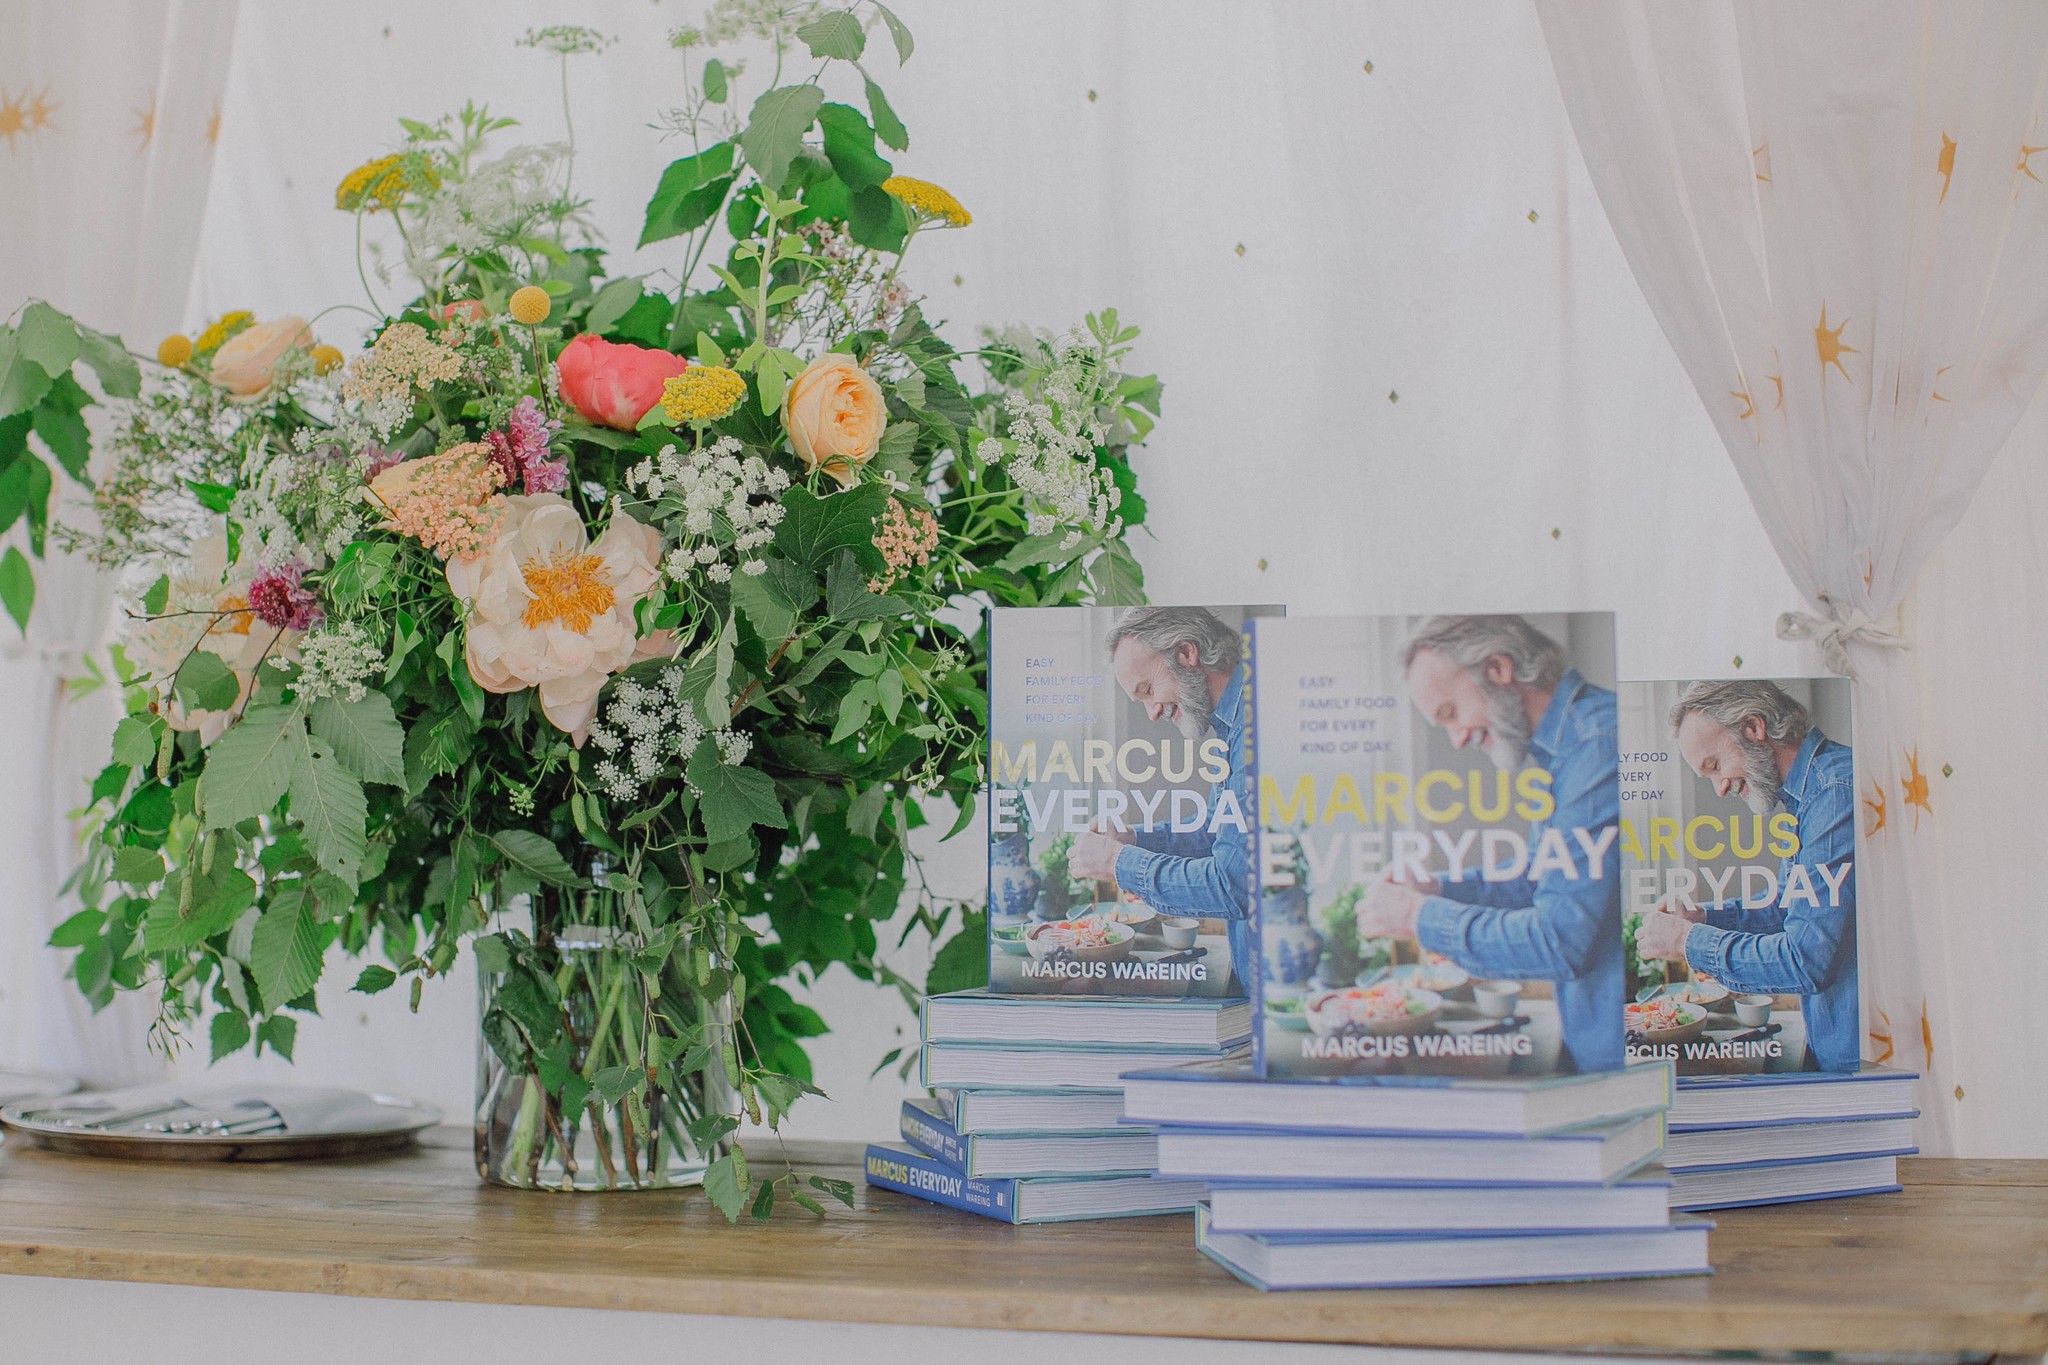 Three stacks of Marcus Everyday books next to a large vase of flowers